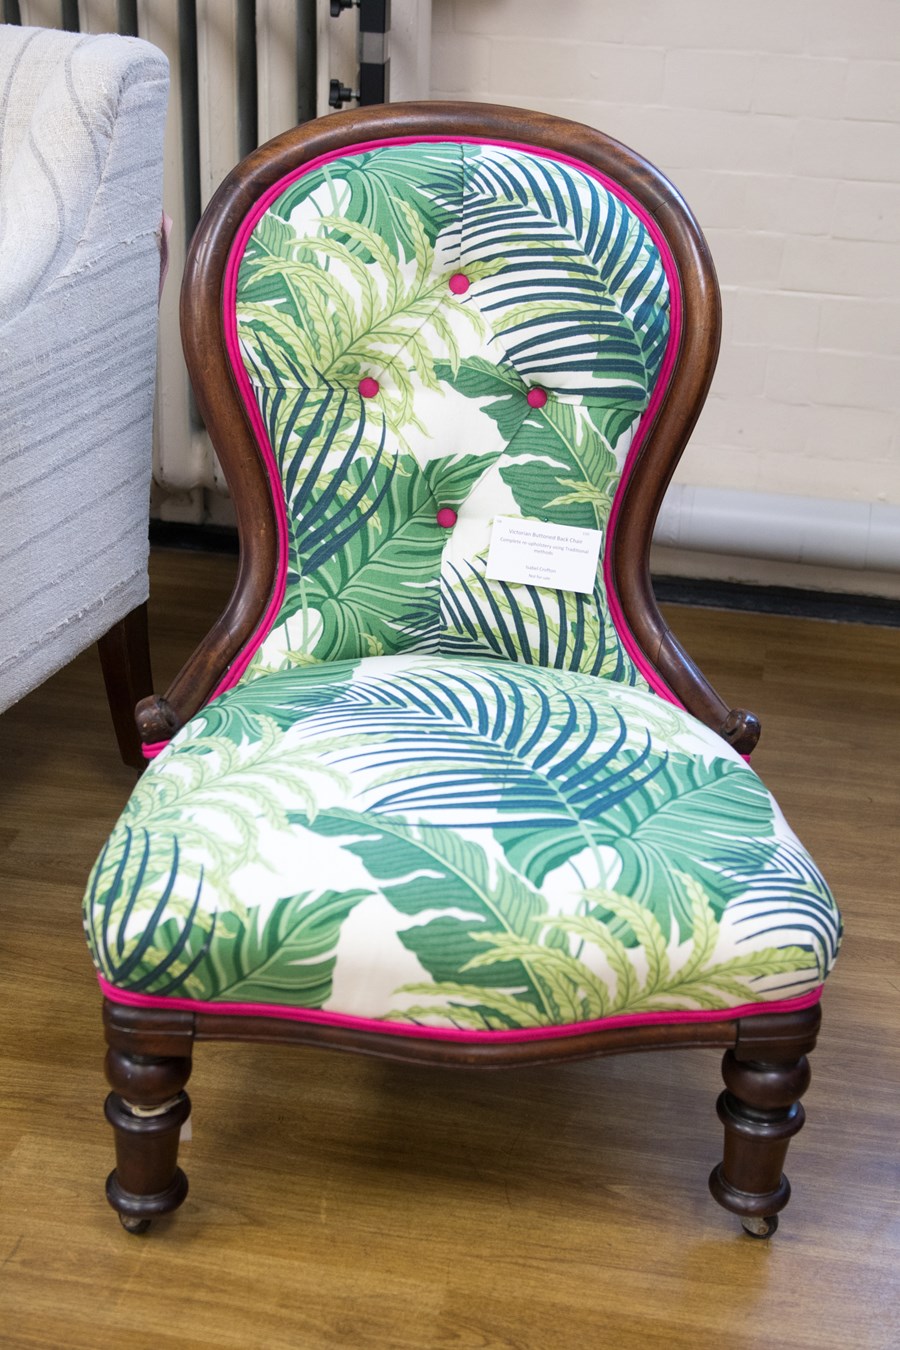 A wooden char upholstered with palm leaf print